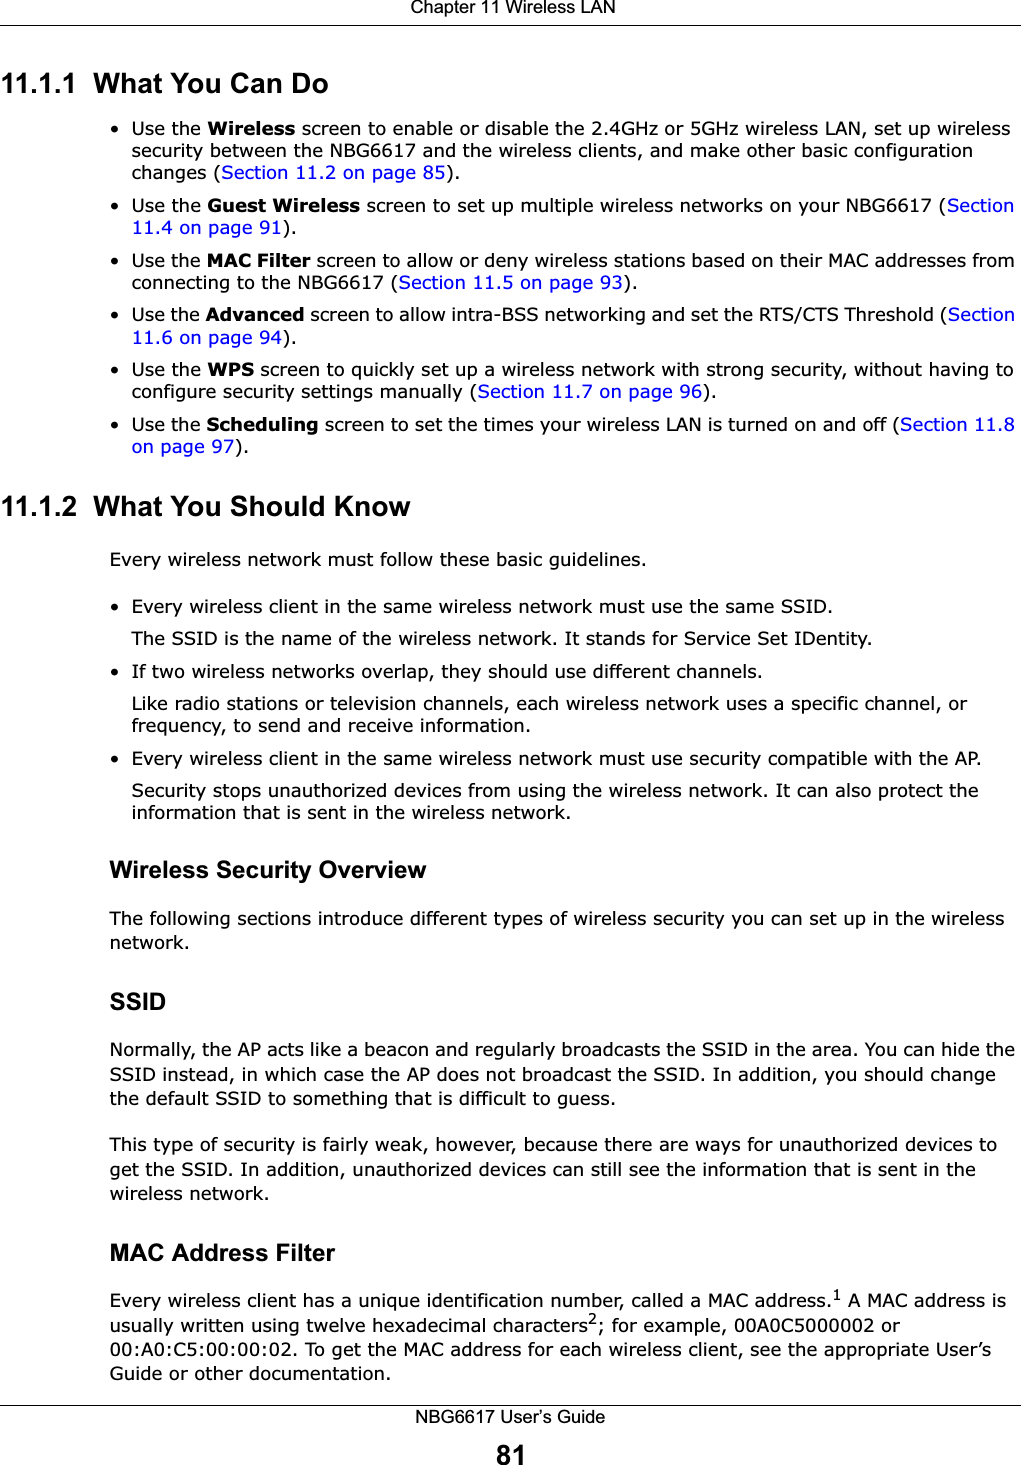  Chapter 11 Wireless LANNBG6617 User’s Guide8111.1.1  What You Can Do•Use the Wireless screen to enable or disable the 2.4GHz or 5GHz wireless LAN, set up wireless security between the NBG6617 and the wireless clients, and make other basic configuration changes (Section 11.2 on page 85).•Use the Guest Wireless screen to set up multiple wireless networks on your NBG6617 (Section 11.4 on page 91). •Use the MAC Filter screen to allow or deny wireless stations based on their MAC addresses from connecting to the NBG6617 (Section 11.5 on page 93).• Use the Advanced screen to allow intra-BSS networking and set the RTS/CTS Threshold (Section 11.6 on page 94).•Use the WPS screen to quickly set up a wireless network with strong security, without having to configure security settings manually (Section 11.7 on page 96).•Use the Scheduling screen to set the times your wireless LAN is turned on and off (Section 11.8 on page 97).11.1.2  What You Should KnowEvery wireless network must follow these basic guidelines.• Every wireless client in the same wireless network must use the same SSID.The SSID is the name of the wireless network. It stands for Service Set IDentity.• If two wireless networks overlap, they should use different channels.Like radio stations or television channels, each wireless network uses a specific channel, or frequency, to send and receive information.• Every wireless client in the same wireless network must use security compatible with the AP.Security stops unauthorized devices from using the wireless network. It can also protect the information that is sent in the wireless network.Wireless Security OverviewThe following sections introduce different types of wireless security you can set up in the wireless network.SSIDNormally, the AP acts like a beacon and regularly broadcasts the SSID in the area. You can hide the SSID instead, in which case the AP does not broadcast the SSID. In addition, you should change the default SSID to something that is difficult to guess.This type of security is fairly weak, however, because there are ways for unauthorized devices to get the SSID. In addition, unauthorized devices can still see the information that is sent in the wireless network.MAC Address FilterEvery wireless client has a unique identification number, called a MAC address.1 A MAC address is usually written using twelve hexadecimal characters2; for example, 00A0C5000002 or 00:A0:C5:00:00:02. To get the MAC address for each wireless client, see the appropriate User’s Guide or other documentation.